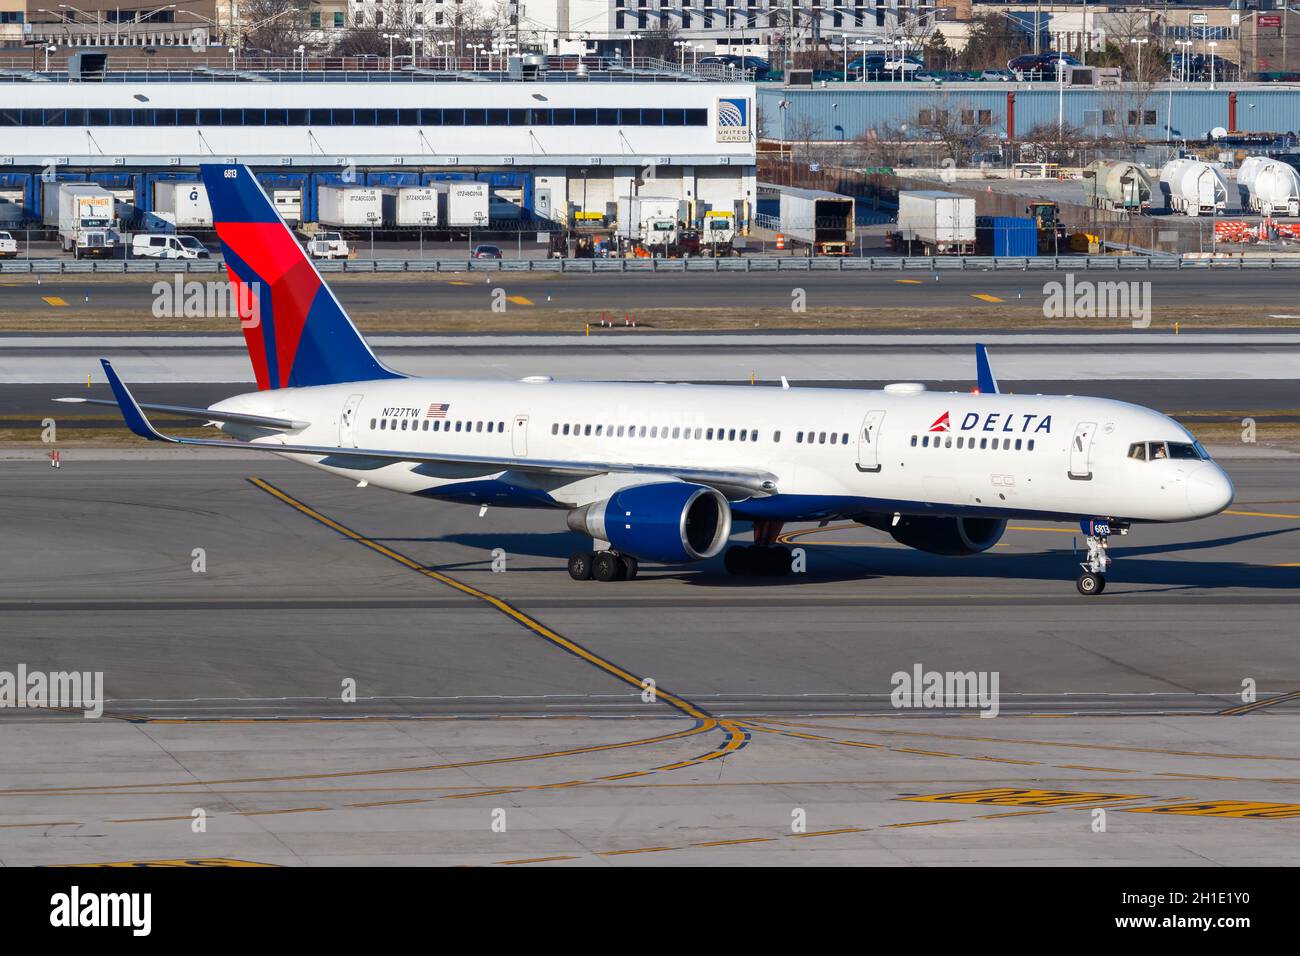 New York City, New York – March 1, 2020: Delta Air Lines Boeing 757-200 airplane at New York JFK airport (JFK) in the United States. Boeing is an Amer Stock Photo